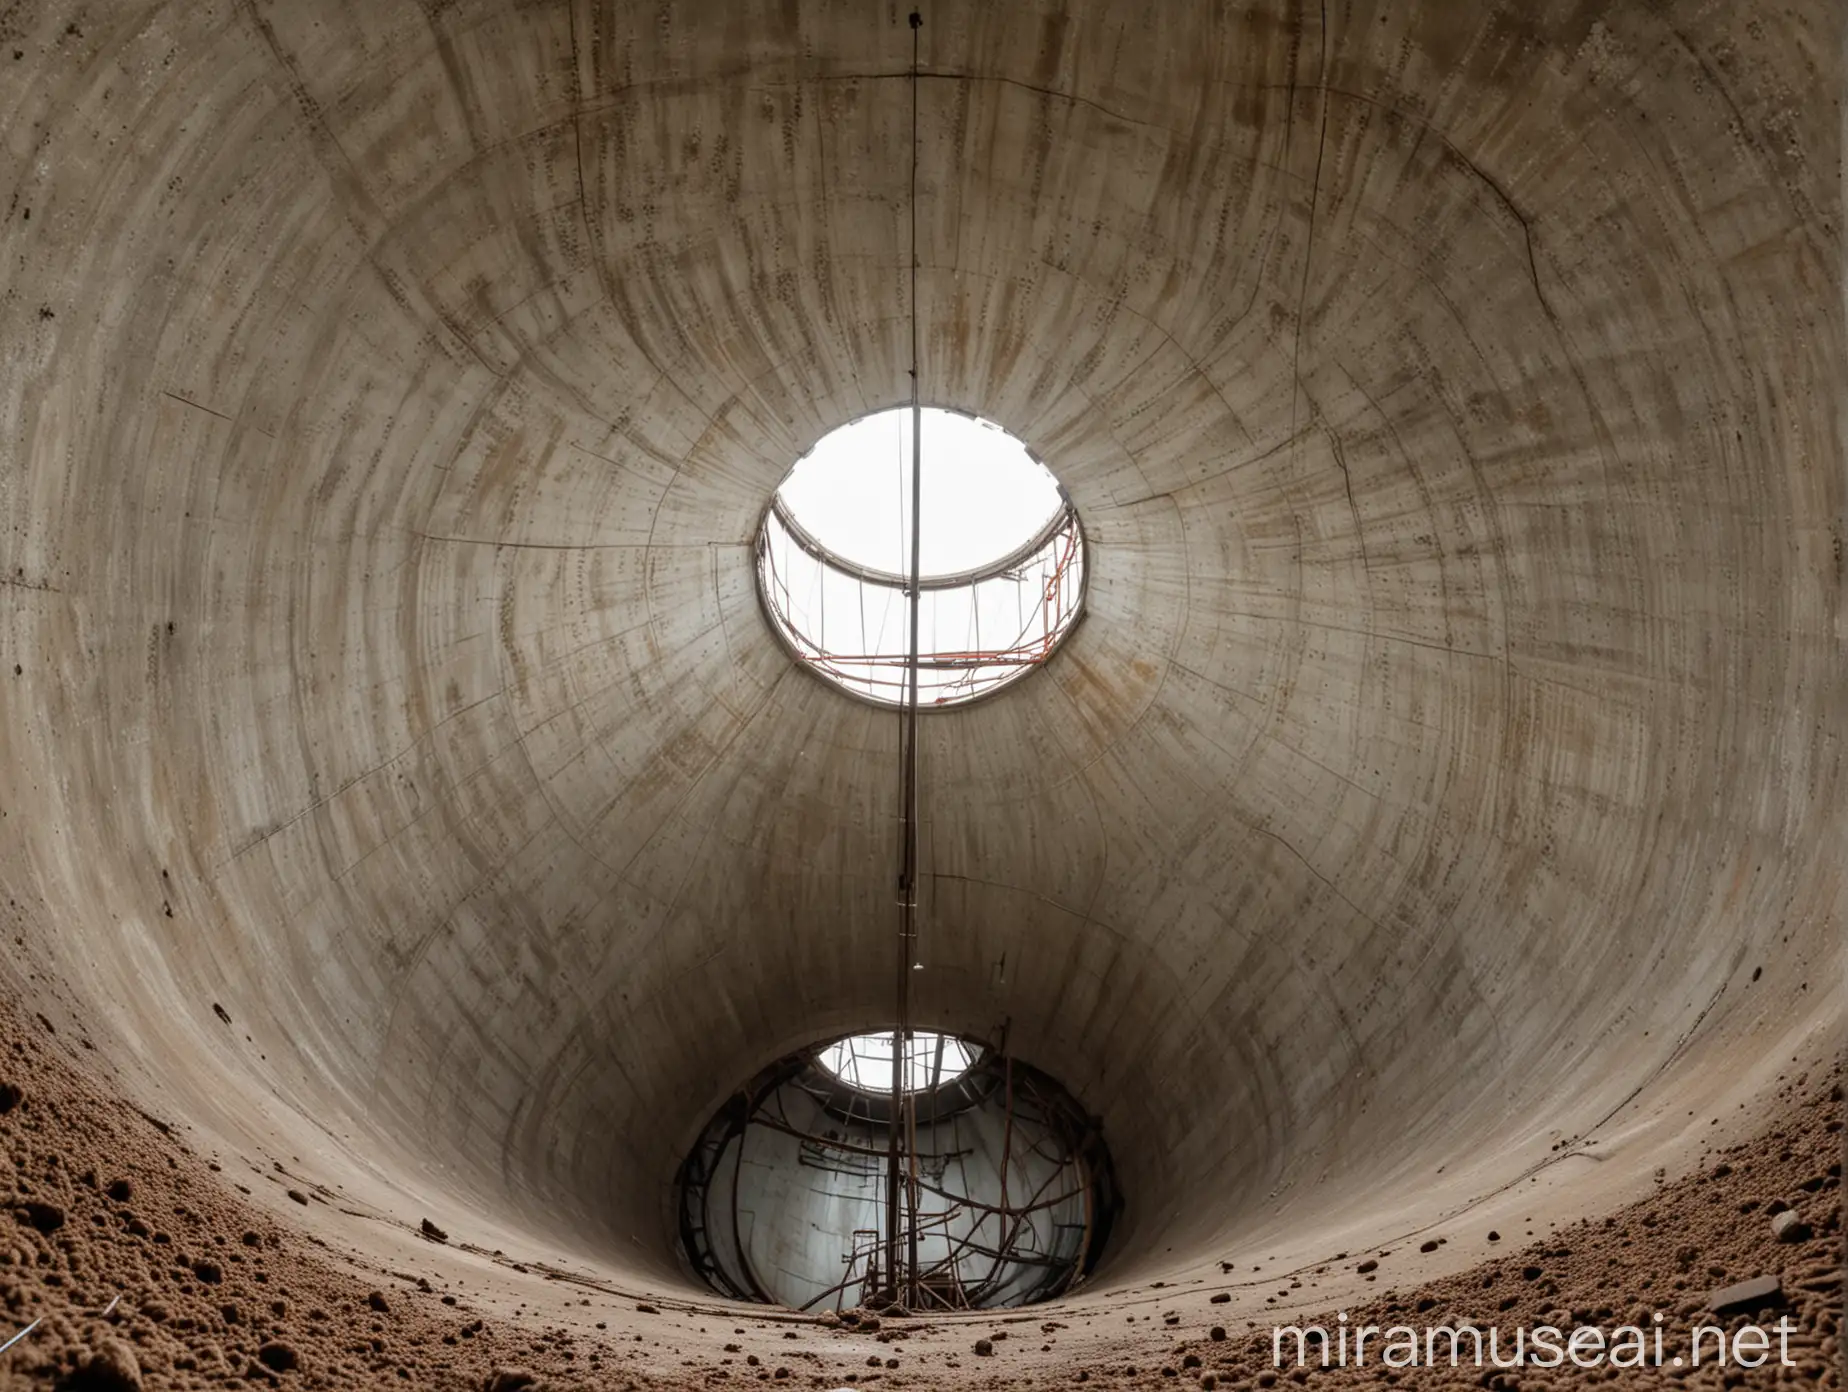 Empty Interior of Water Tower Tank with Wet Ground